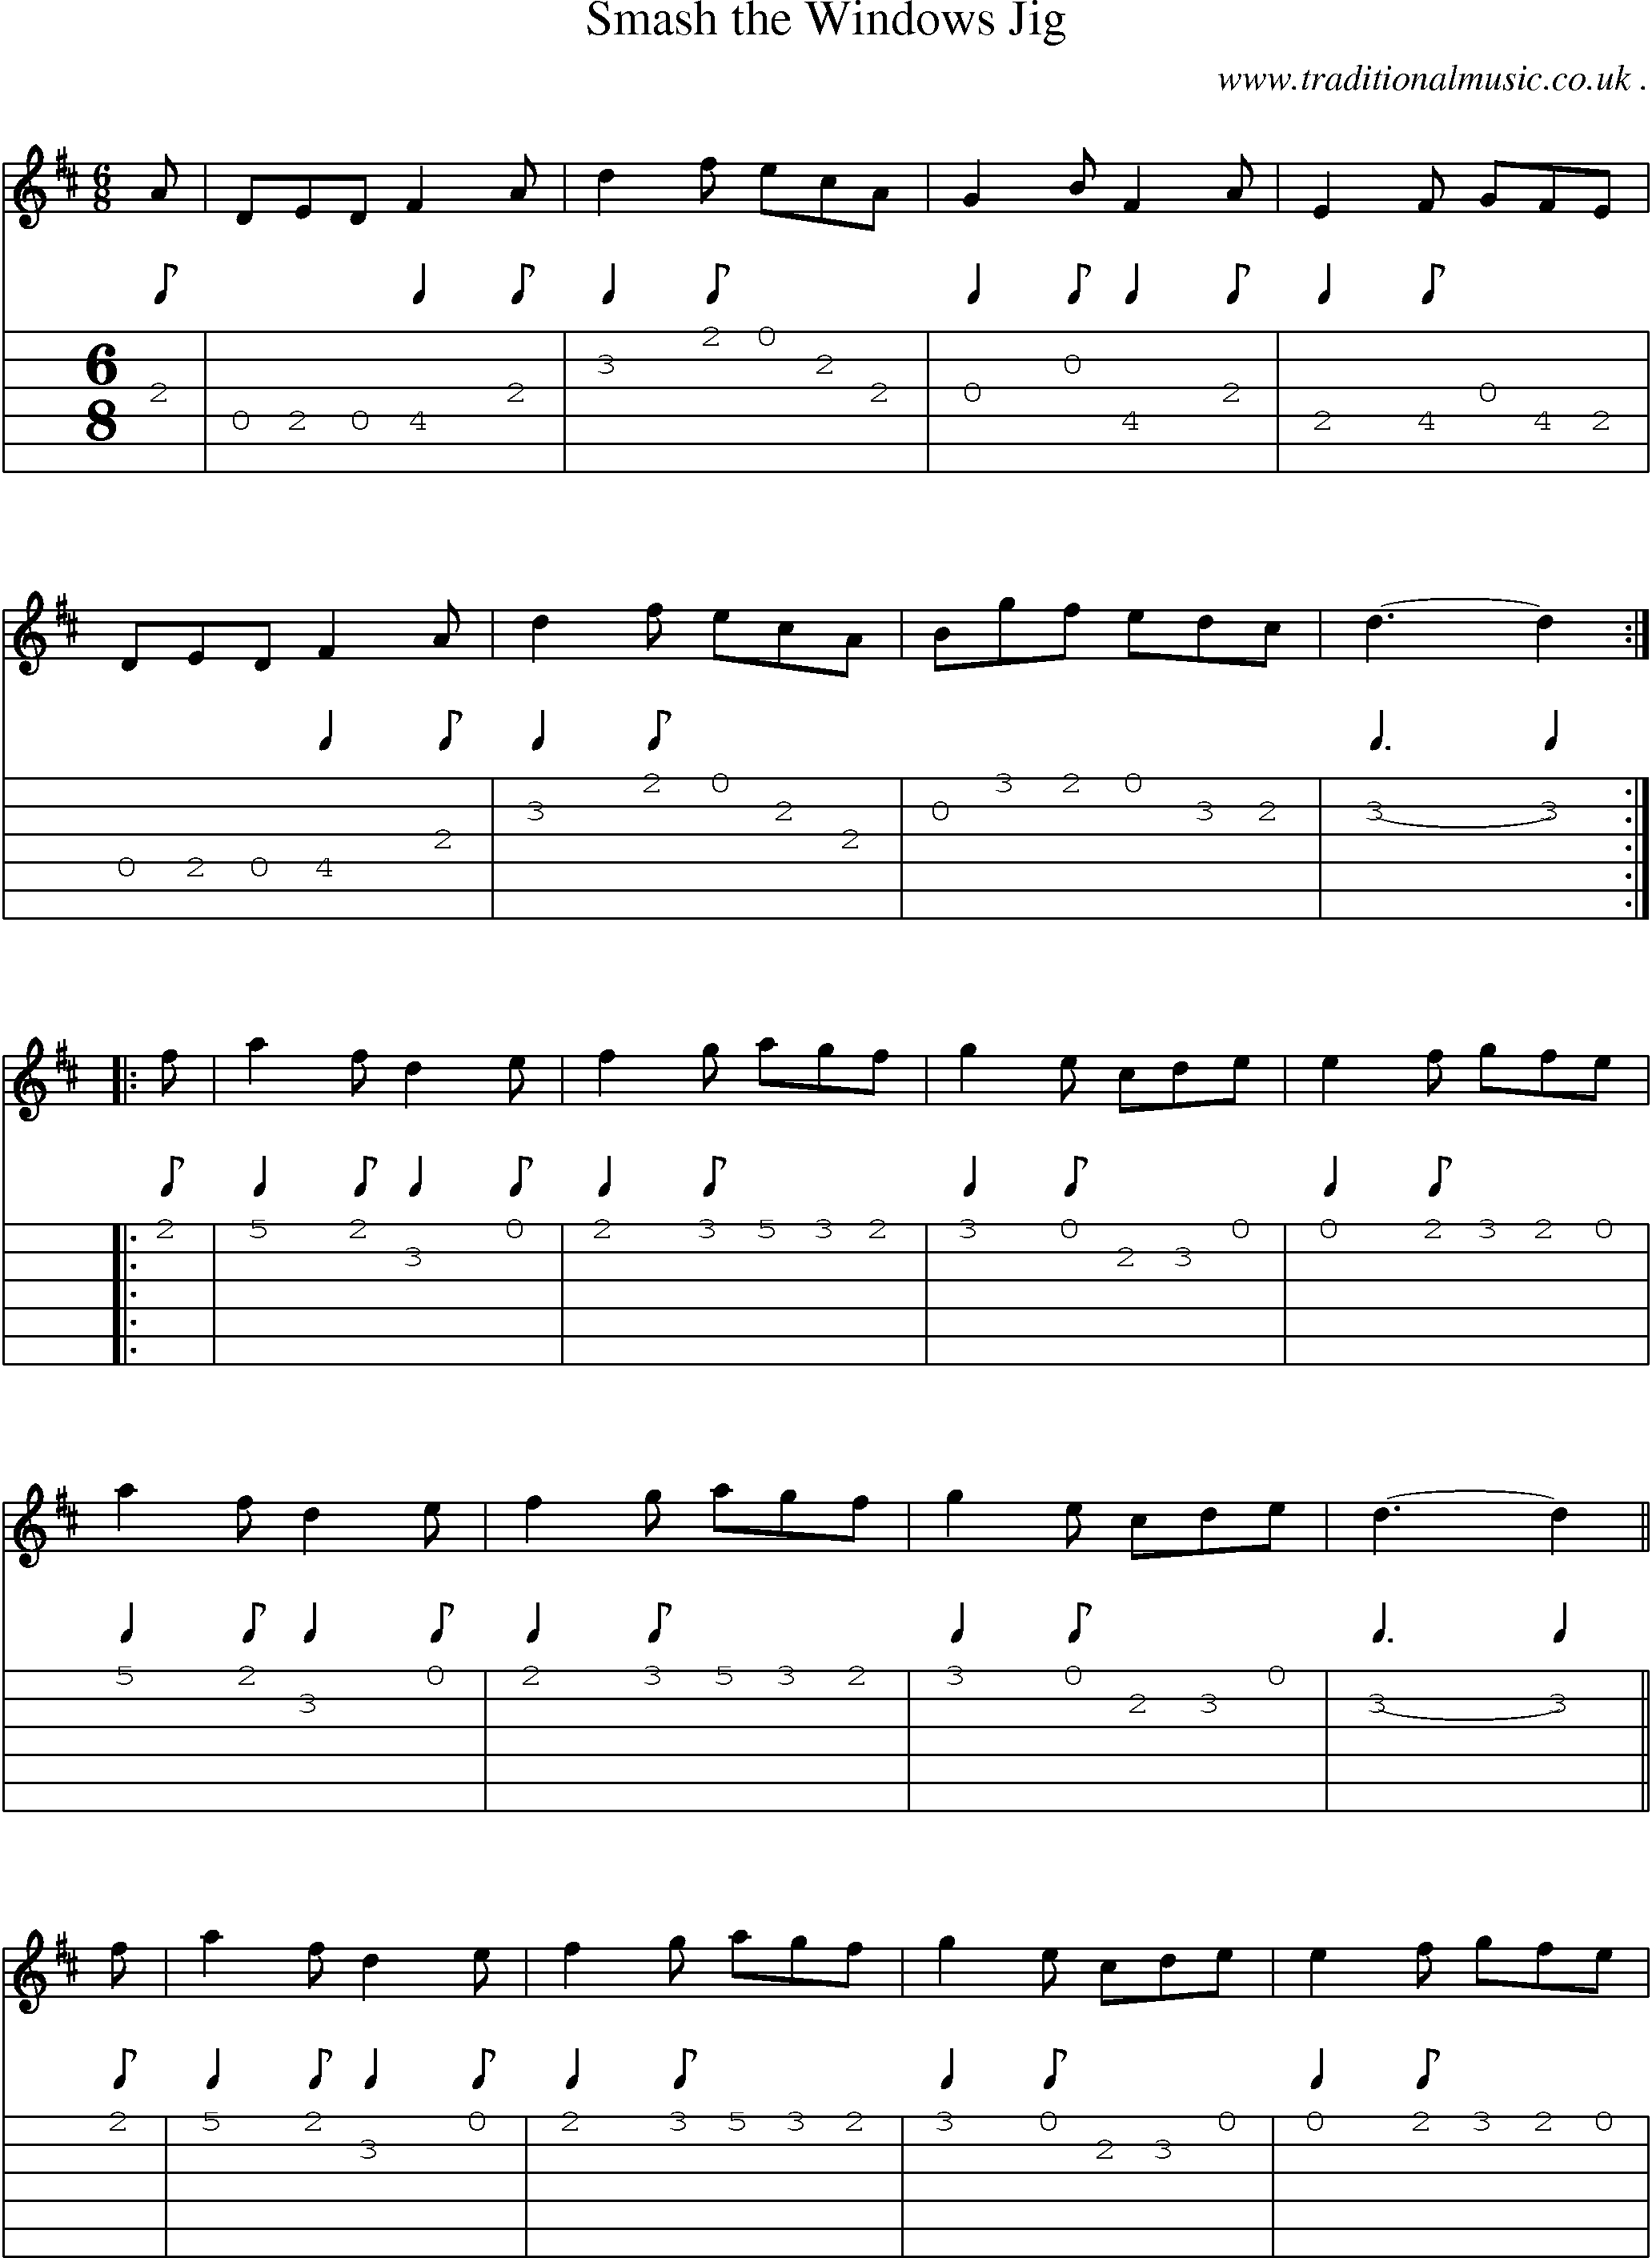 Sheet-Music and Guitar Tabs for Smash The Windows Jig